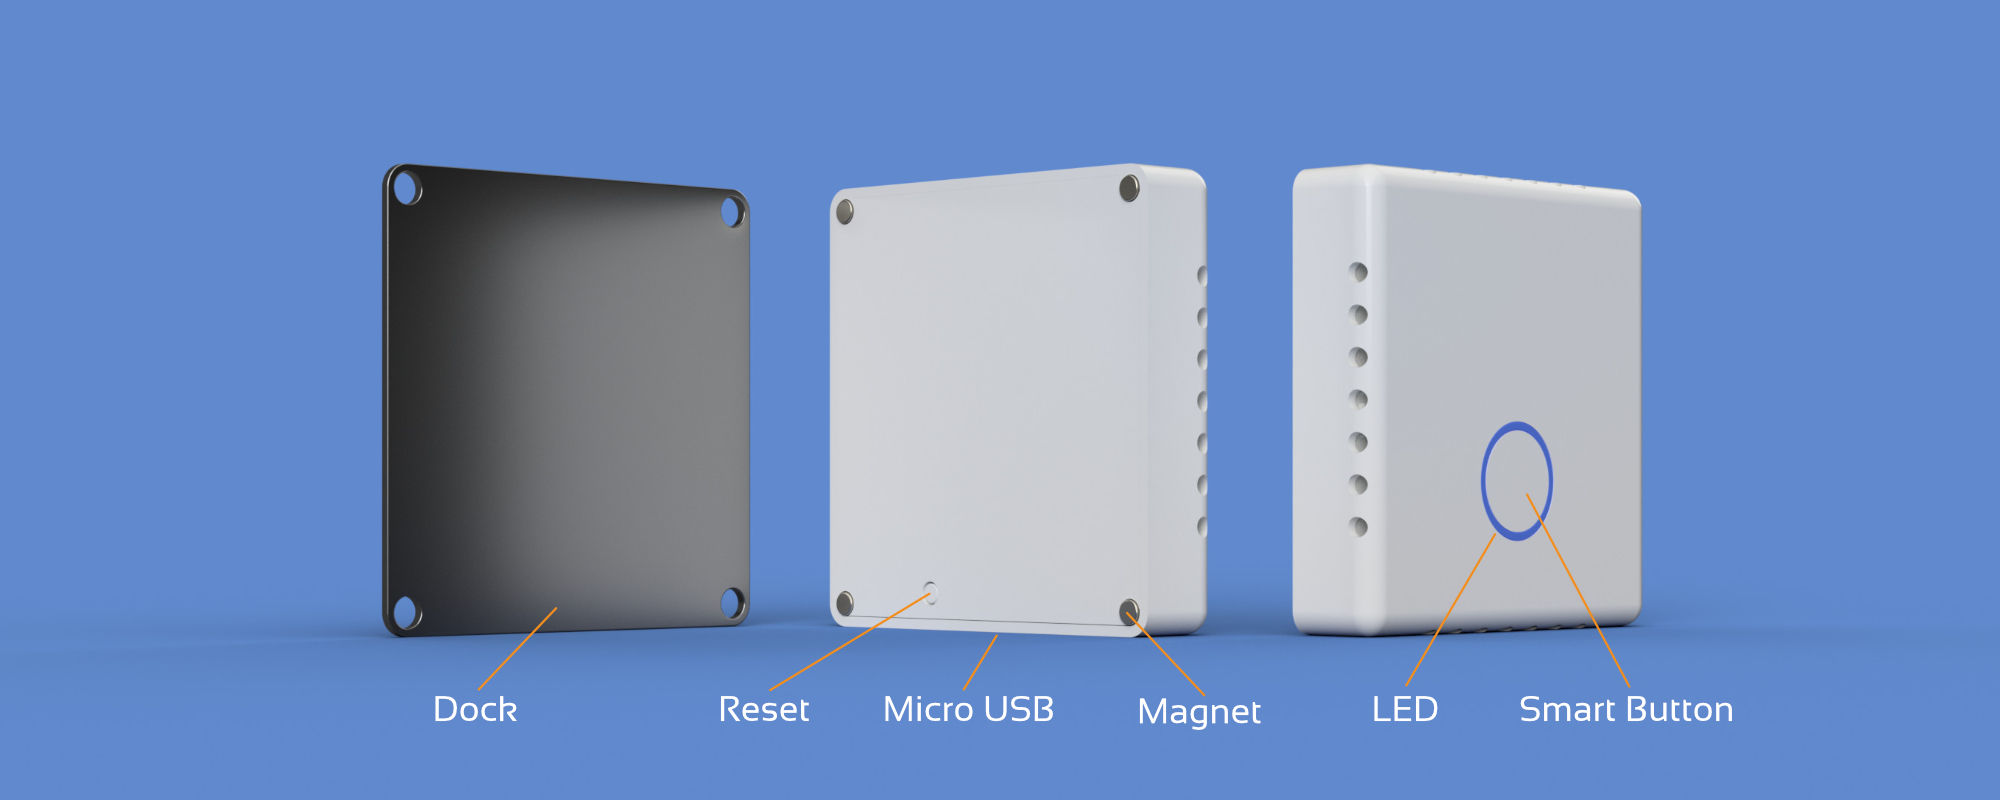 Homsense ports and interface: Micro USB, Dock, Reset, Magnet, LED and Smart Button